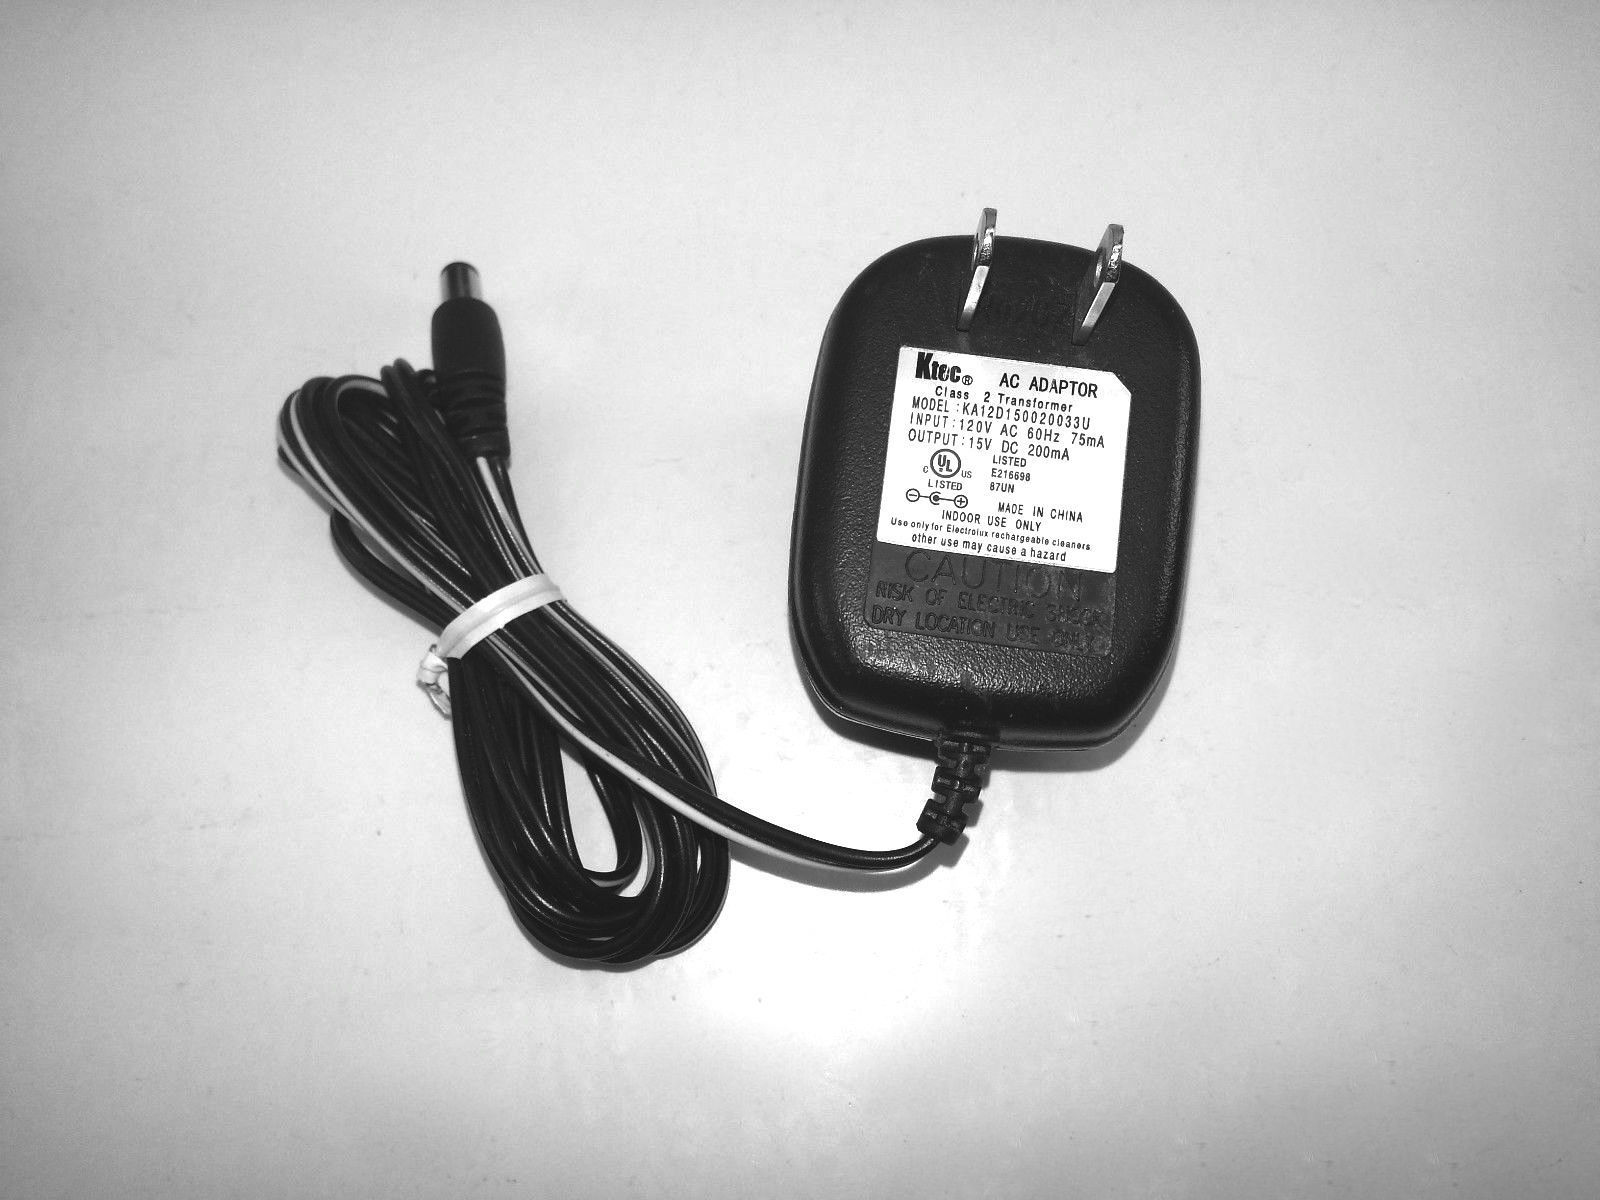 NEW 15V 200mA Ktec Power Cable AC Cord Adapter For Vacuum Cleaner BD10100 BD10085 - Click Image to Close